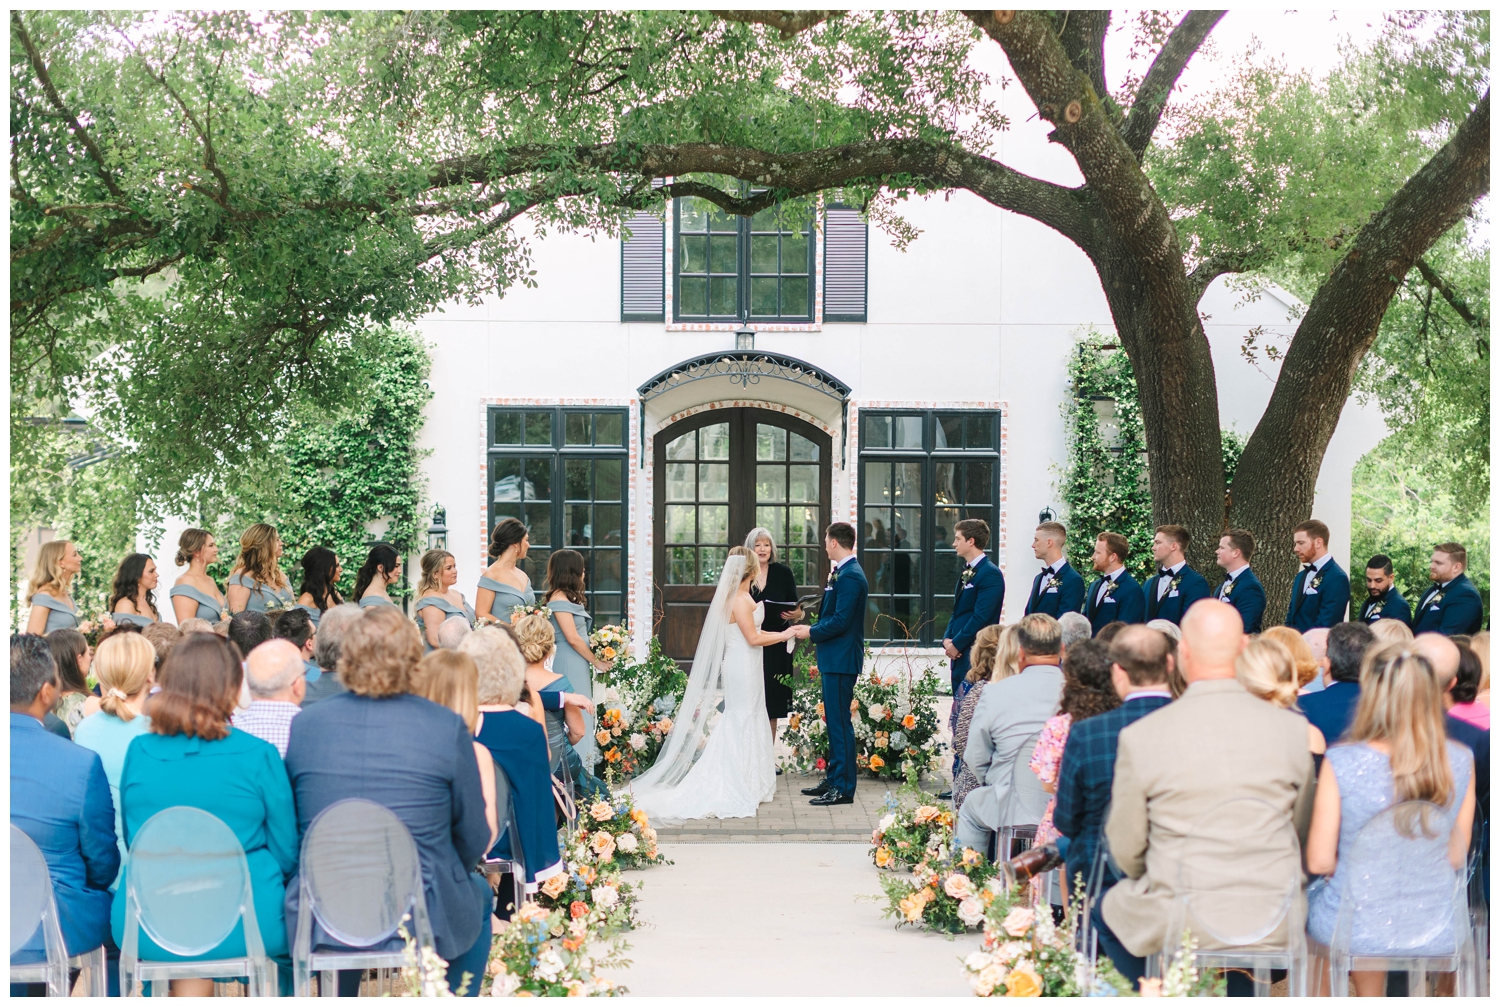 The Peach Orchard Wedding Venue outdoor ceremony bride and groom holding hands